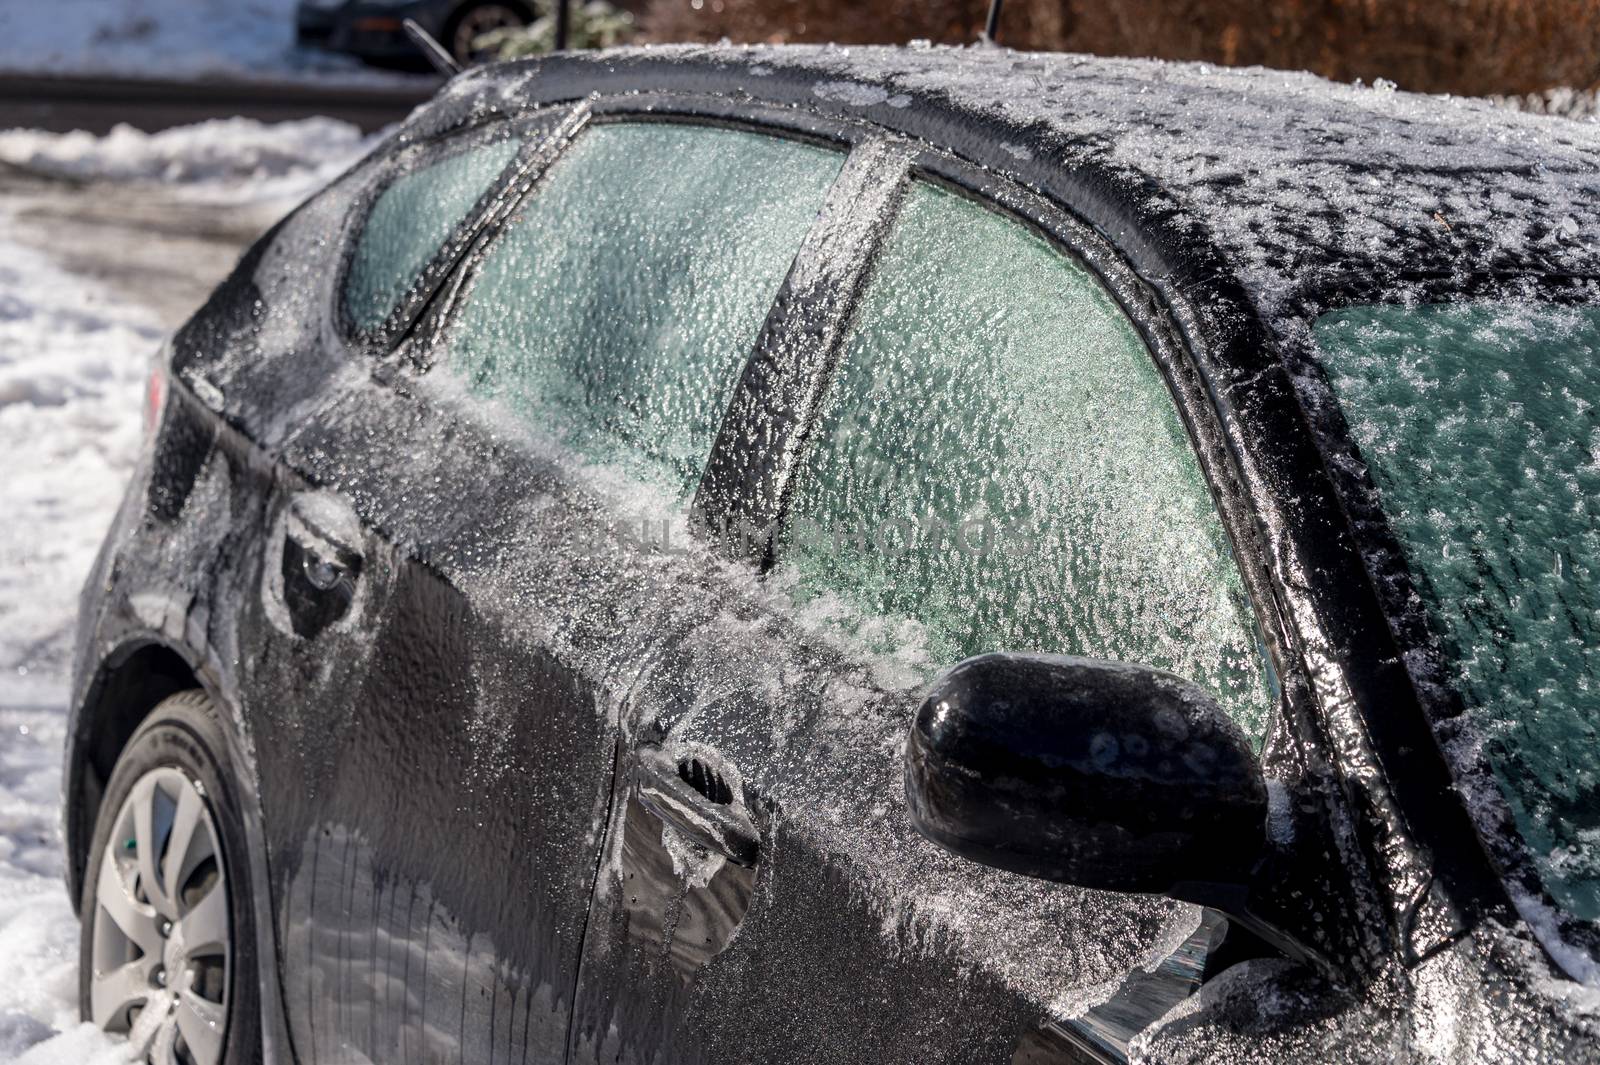 Thick layer of ice covering car after freezing rain in Montreal, Canada